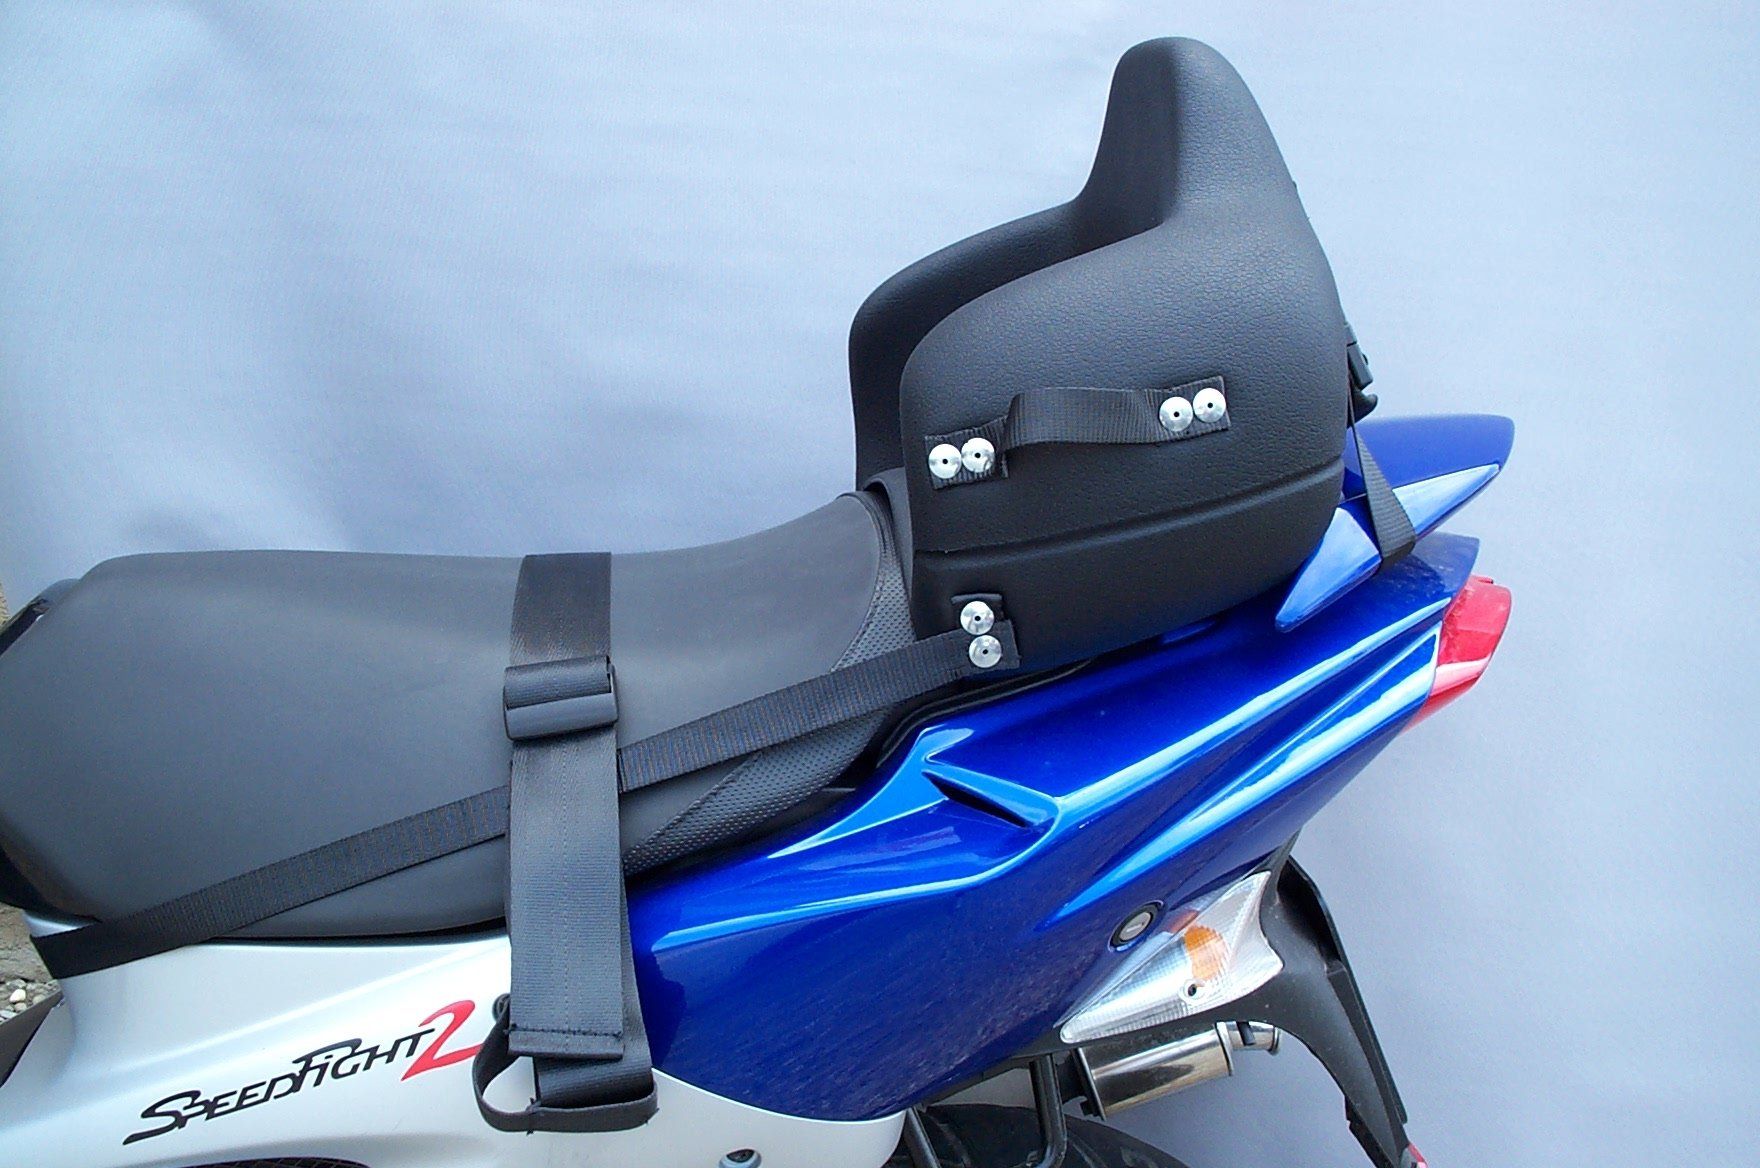 Child seat for standard scooter